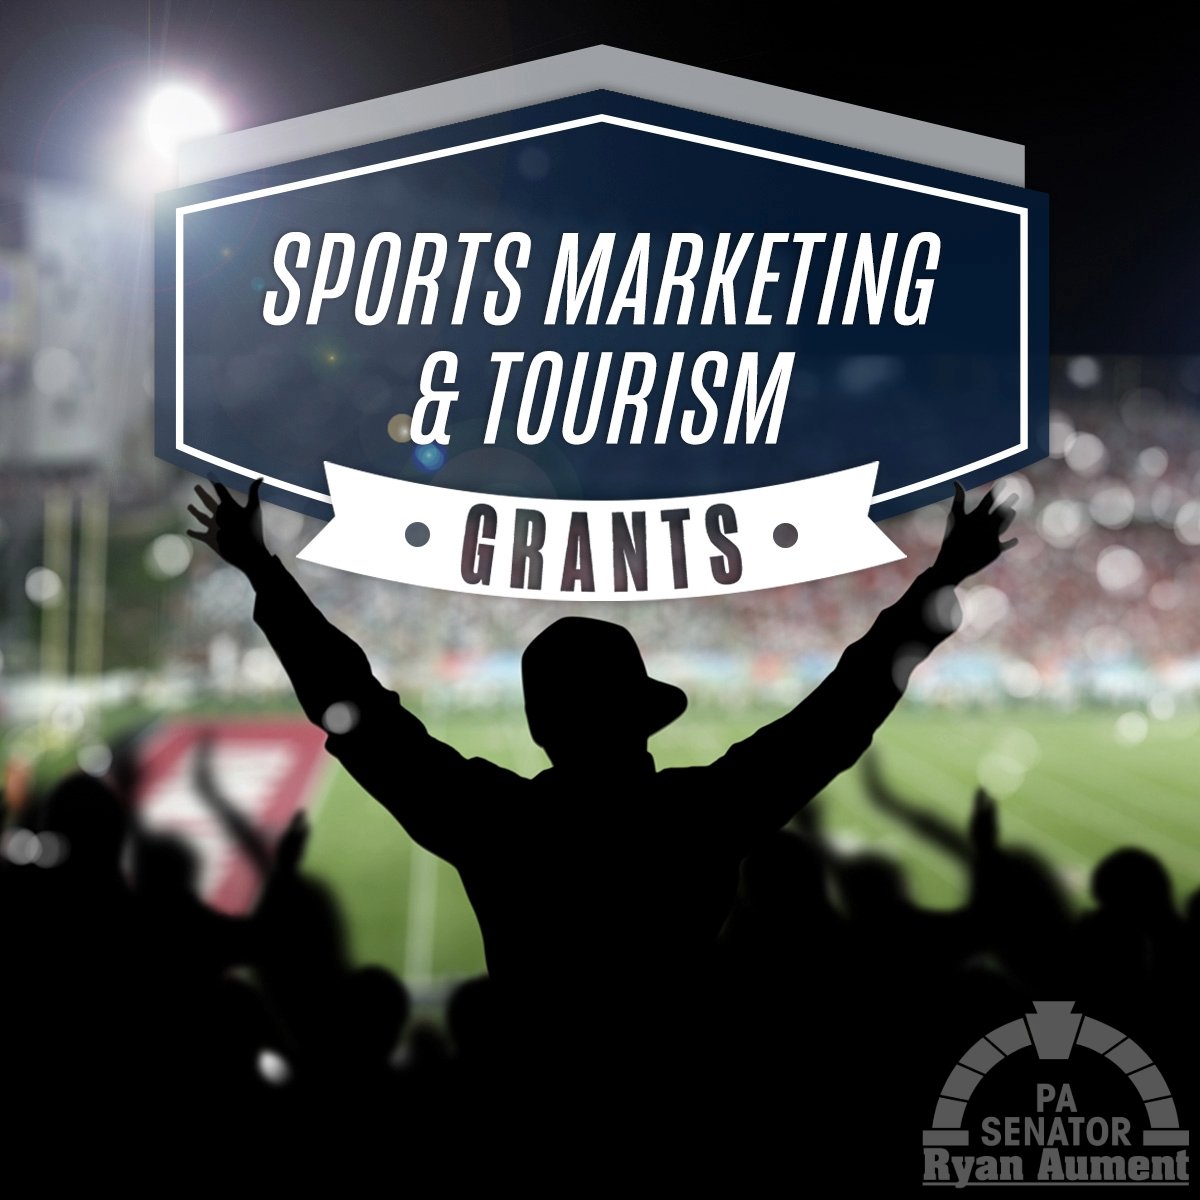 ⚾️🏈🏀⚽️ Communities can apply now for Sports Marketing and Tourism Program grants to attract amateur and professional sporting and e-sports events – and their economic benefits – to PA. Details ➡️ bit.ly/3QlE7uS